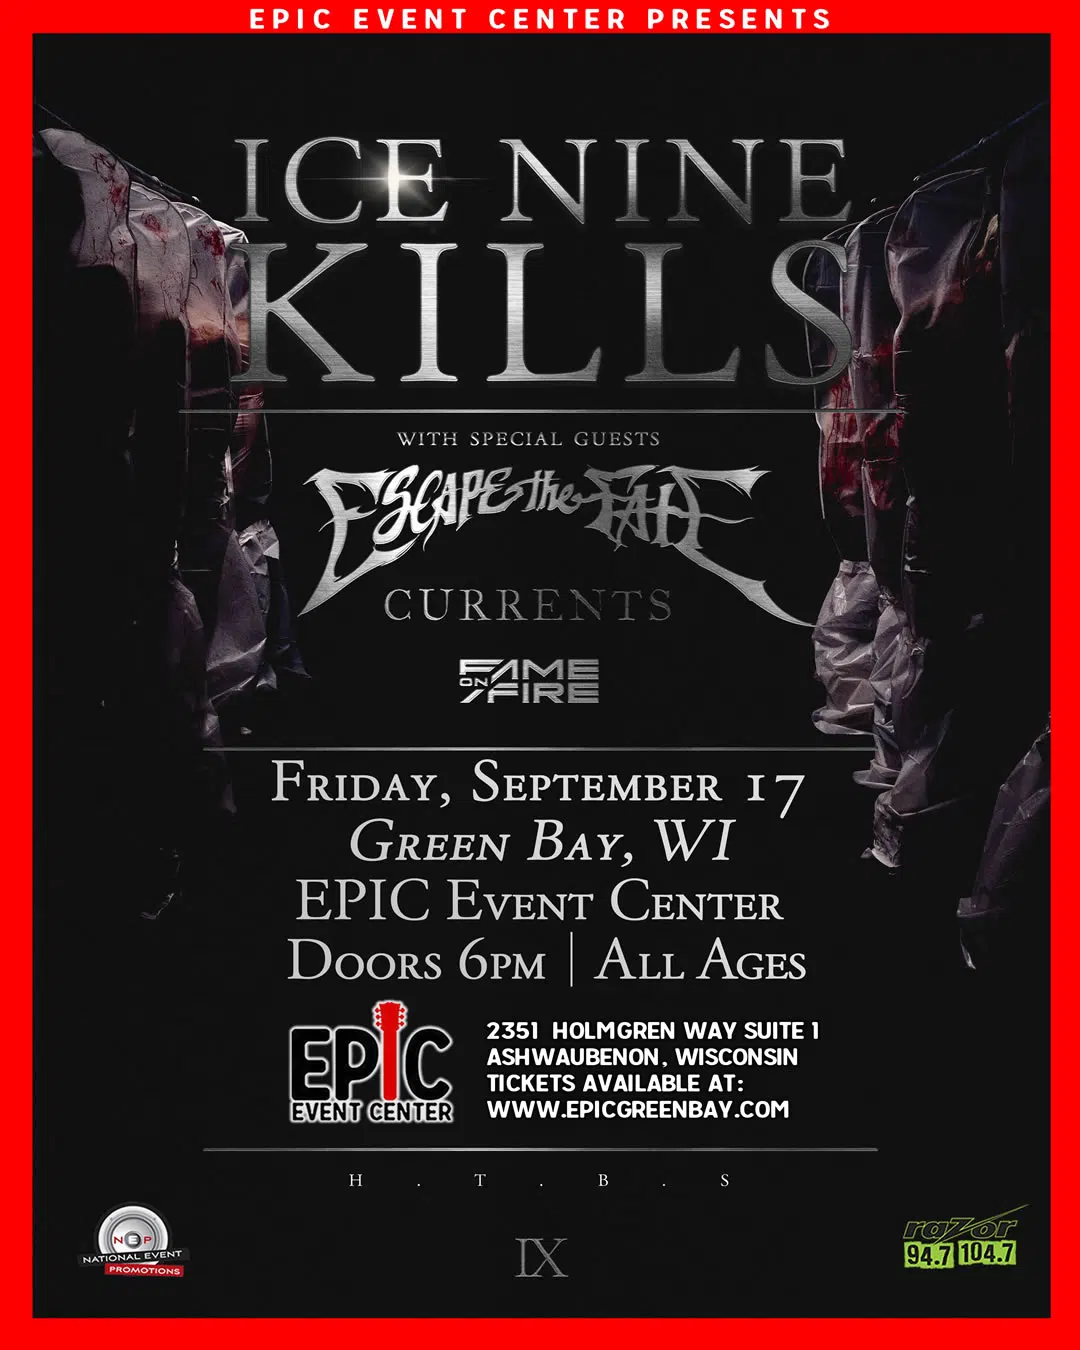 Ice Nine Kills, Escape the Fate, Currents, and Fame the Fire at Epic Event Center on September 17th